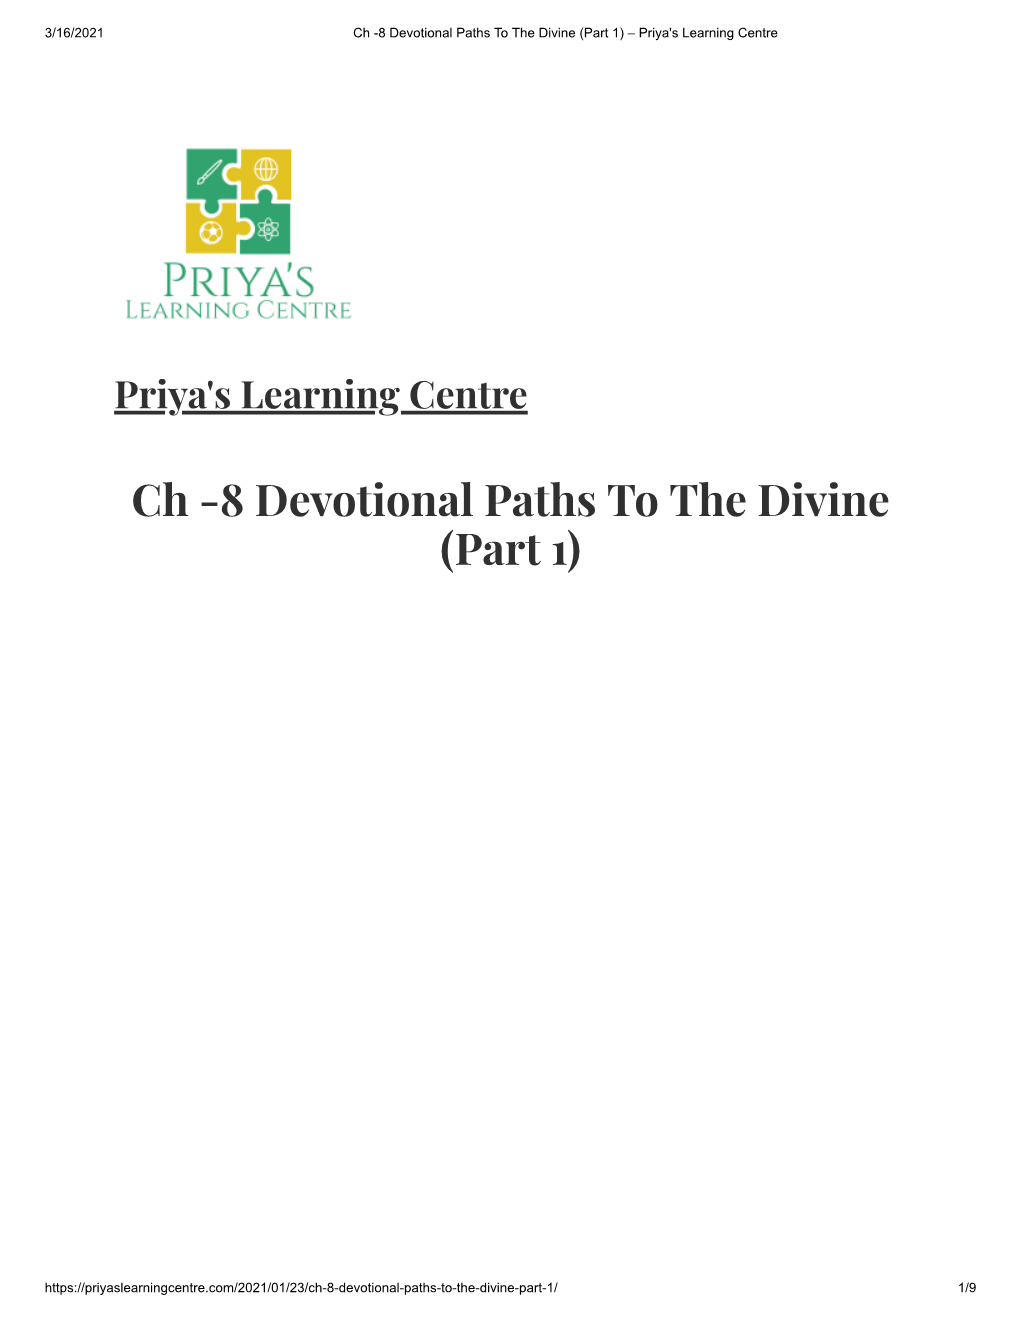 Ch-8-Devotional-Paths-To-The-Divine-Part-1/ 1/9 3/16/2021 Ch -8 Devotional Paths to the Divine (Part 1) – Priya's Learning Centre